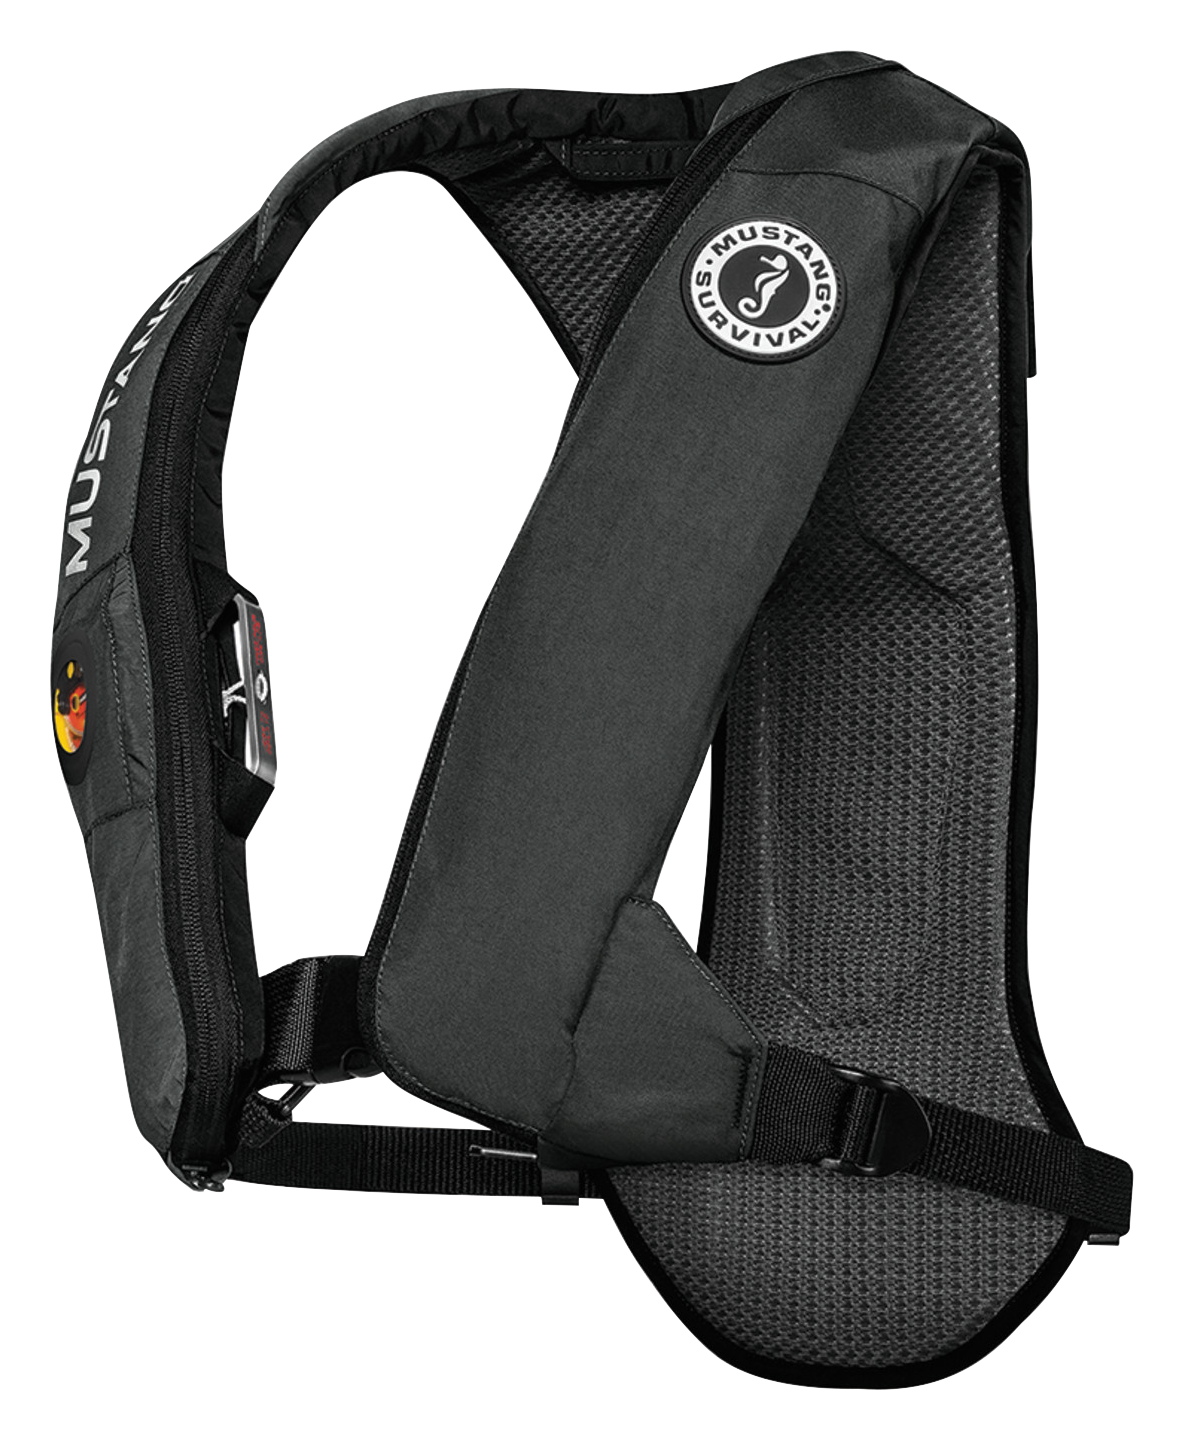 Mustang Survival Elite Inflatable Life Vest with HIT - Black